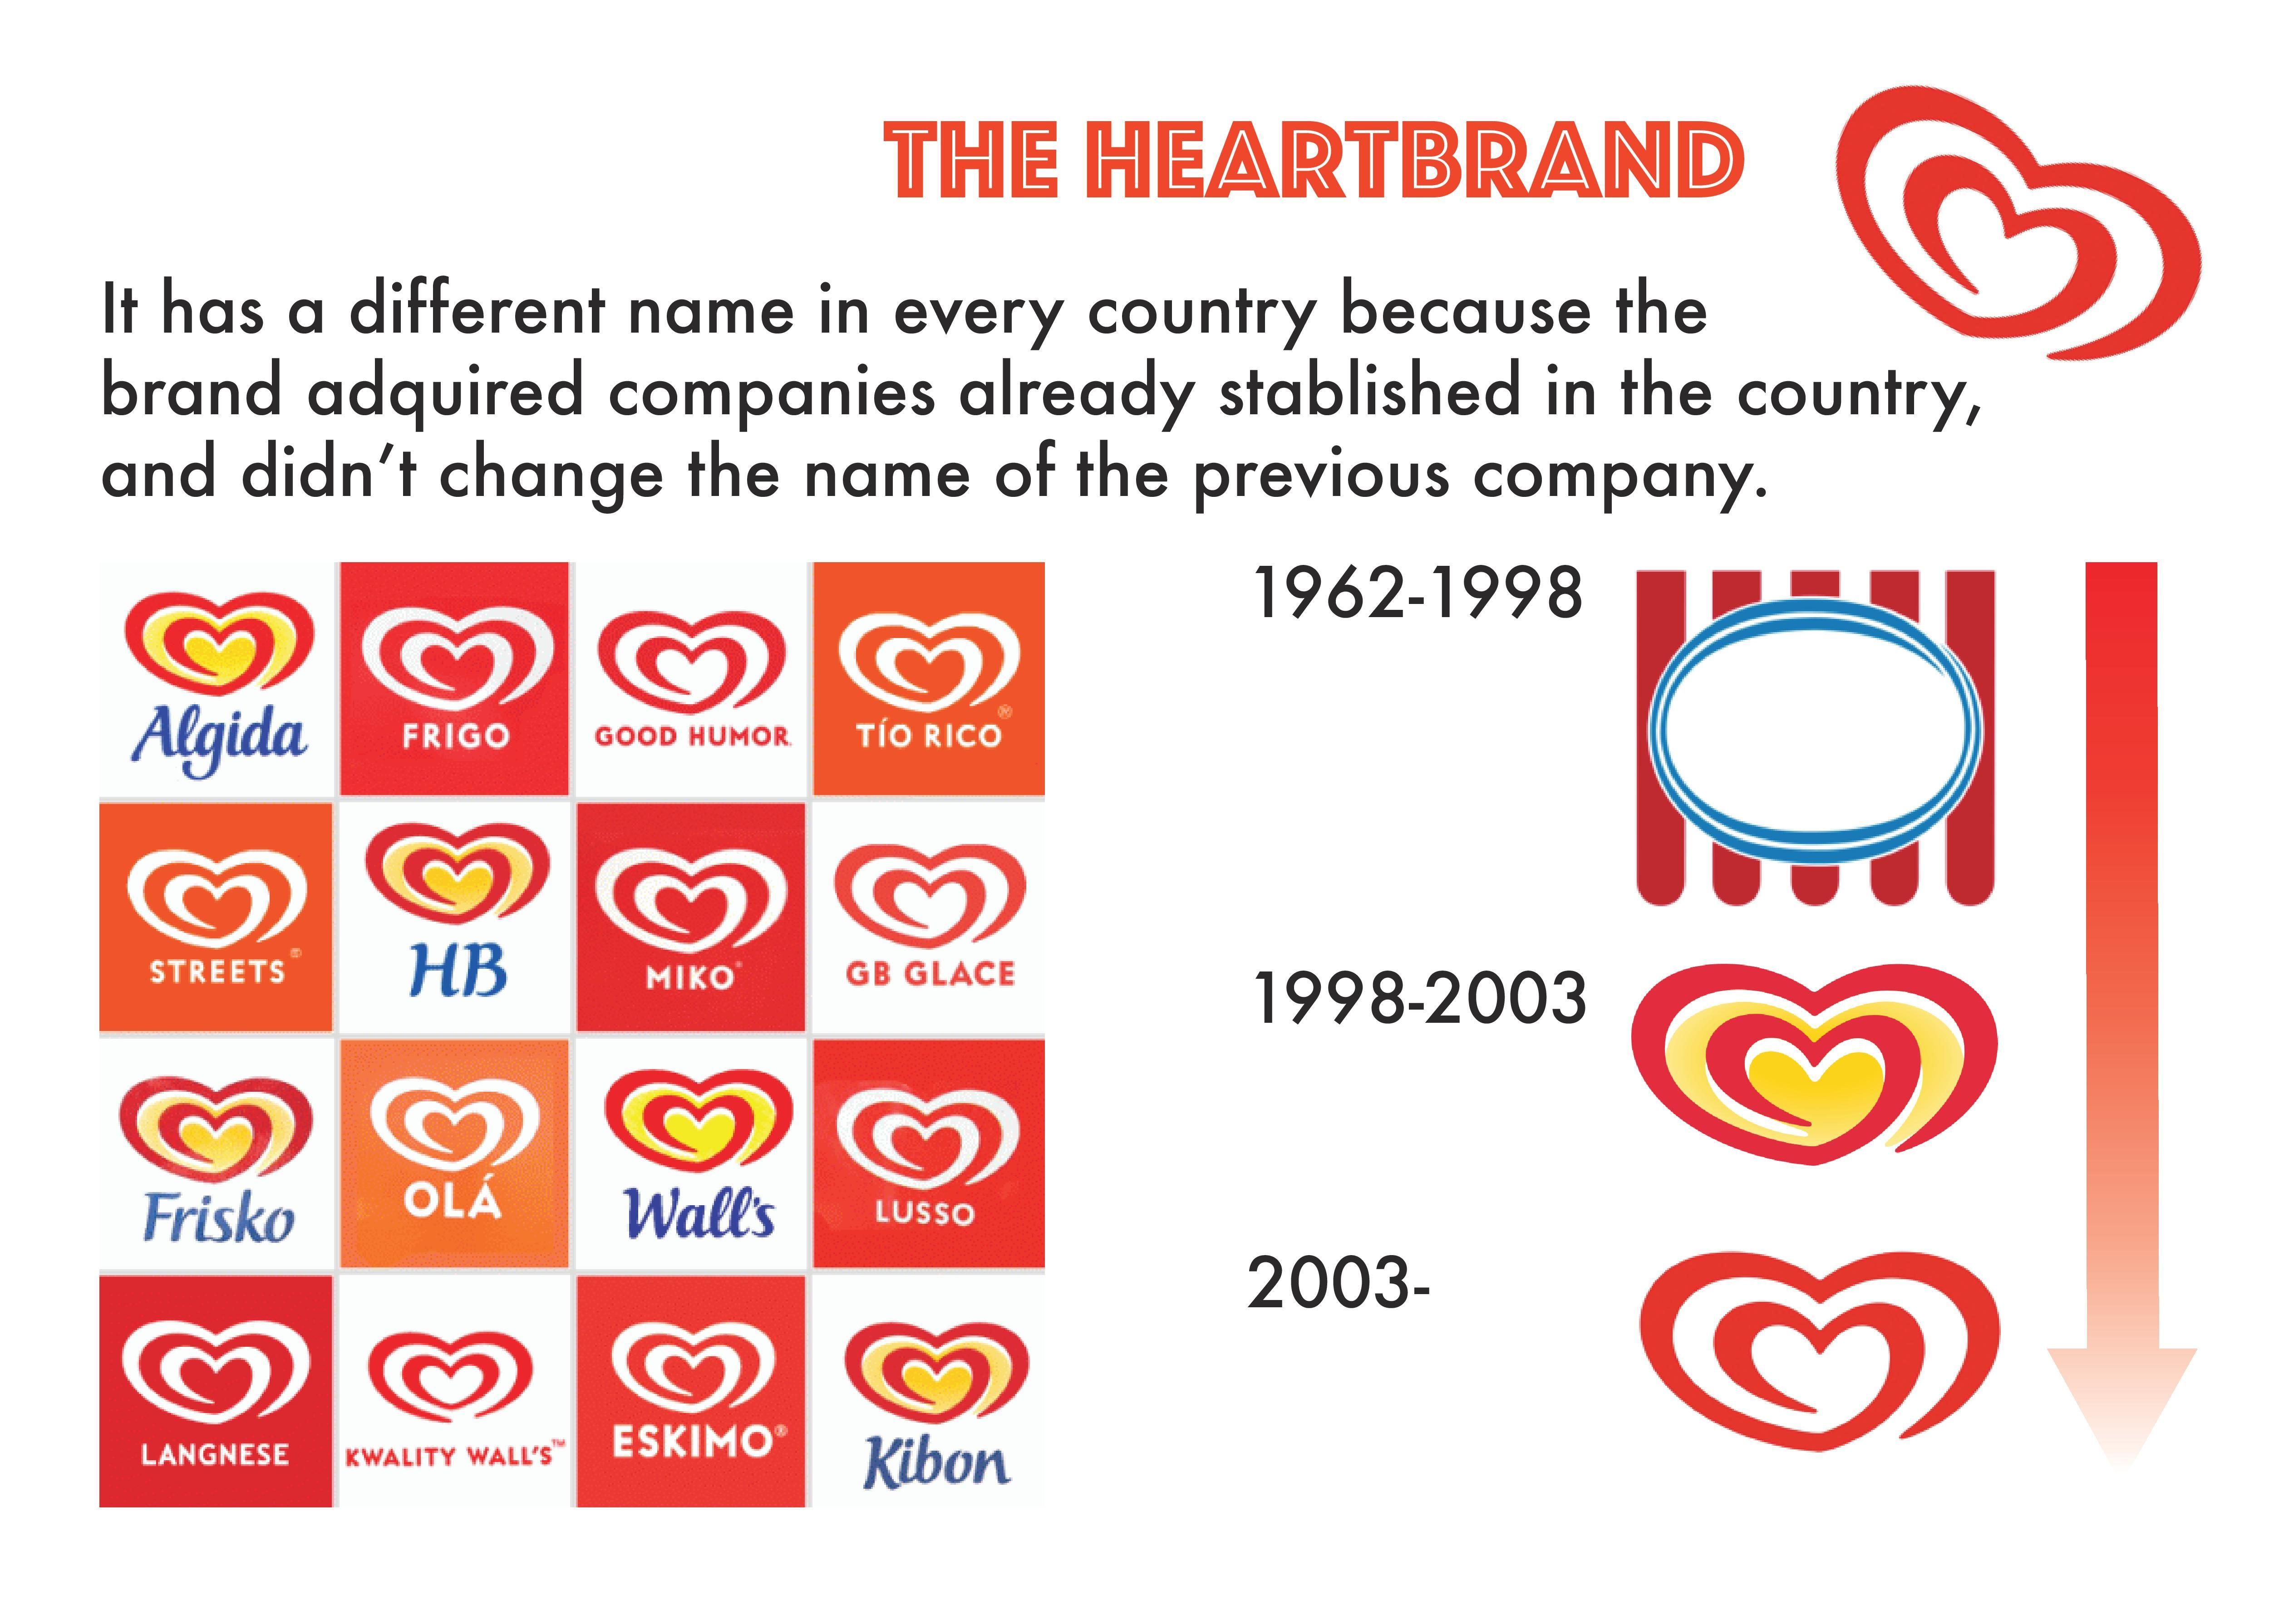 Heartbrand Logo - Day 1. Today I choose the Heartbrand because I find very curious